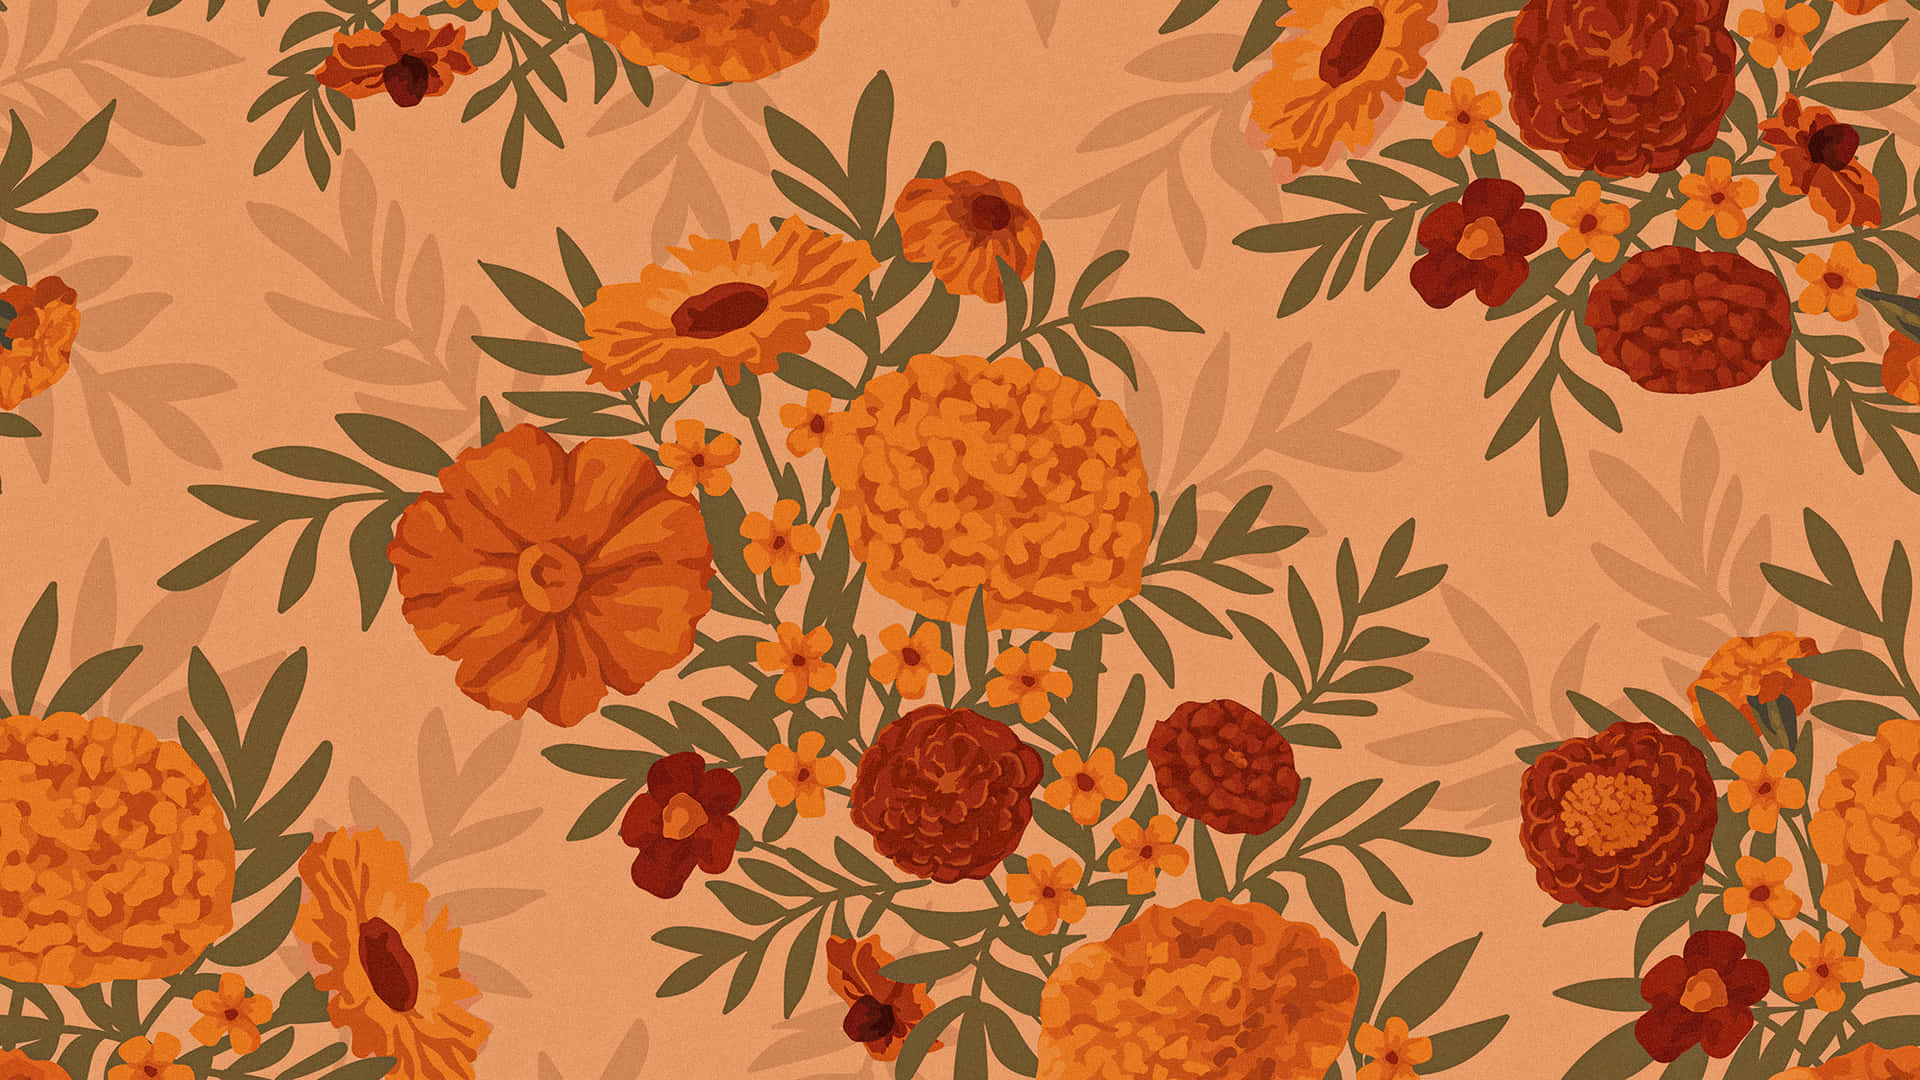 Brighten up your workspace with this colorful orange wallpaper. Wallpaper